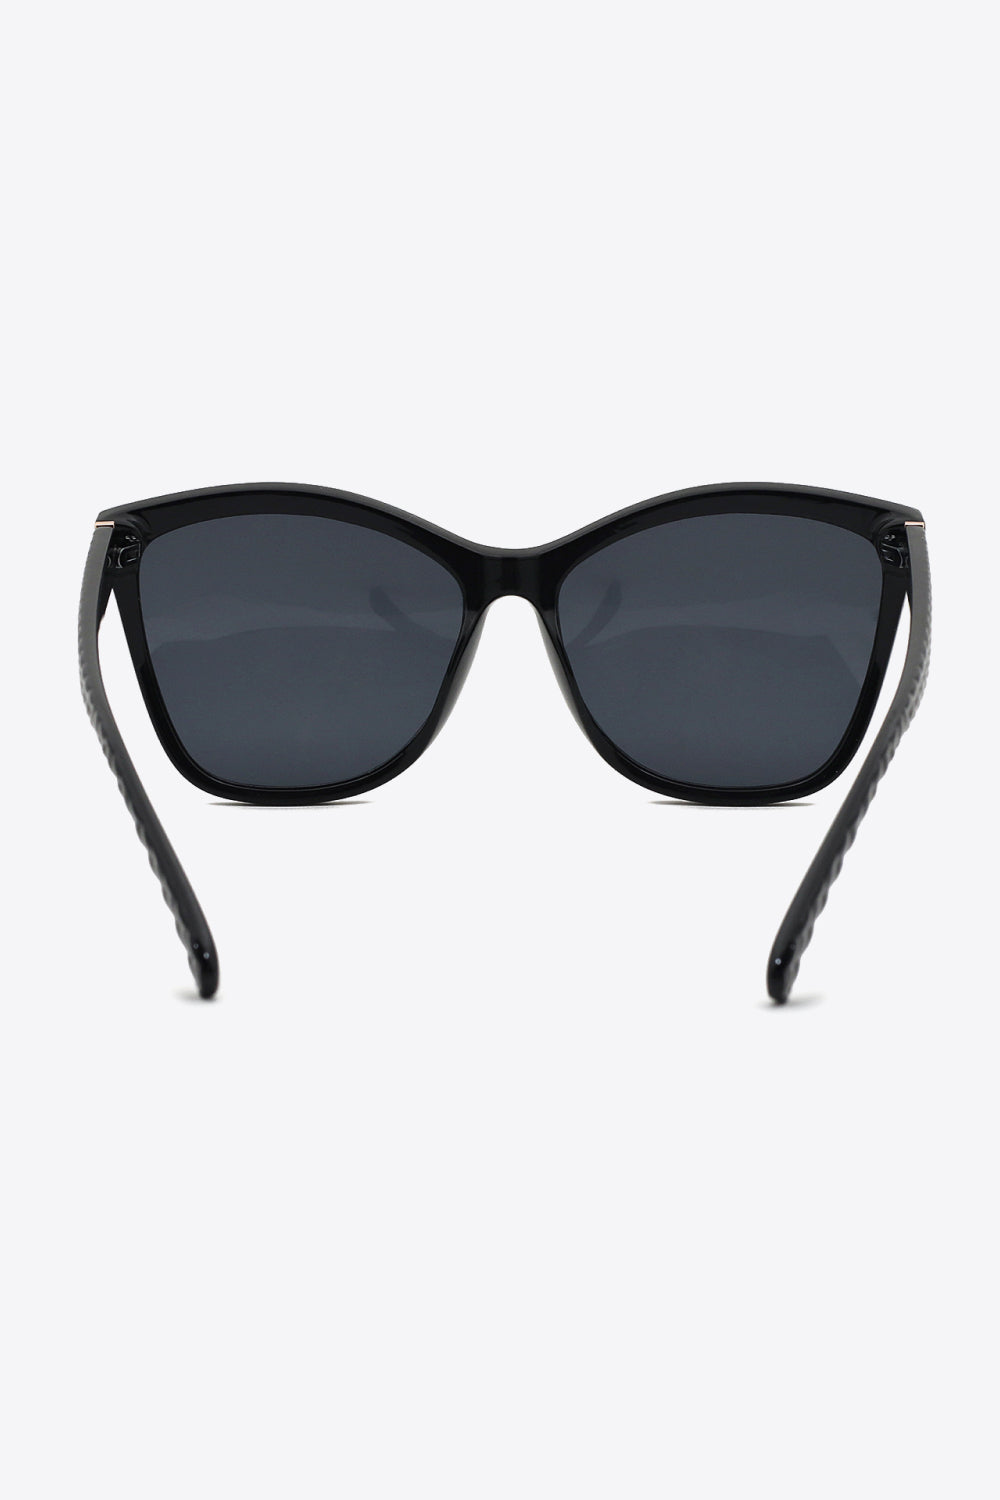 Throwing Shade Sunglasses, TWO COLORS!